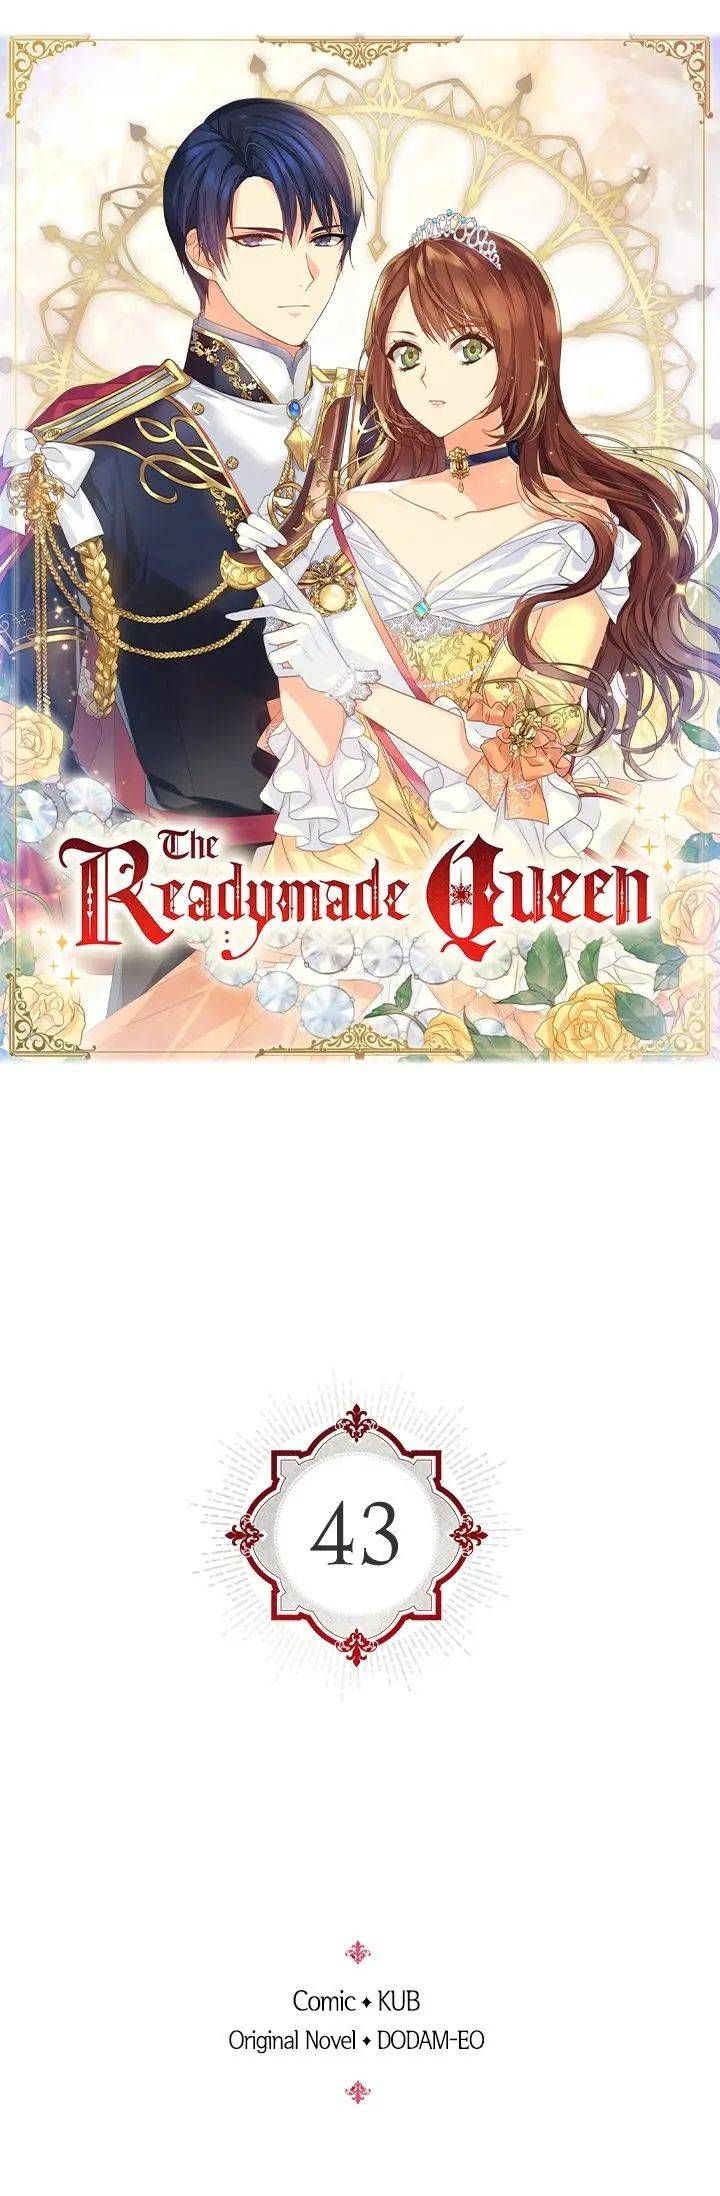 The Readymade Queen Chapter 43 page 1